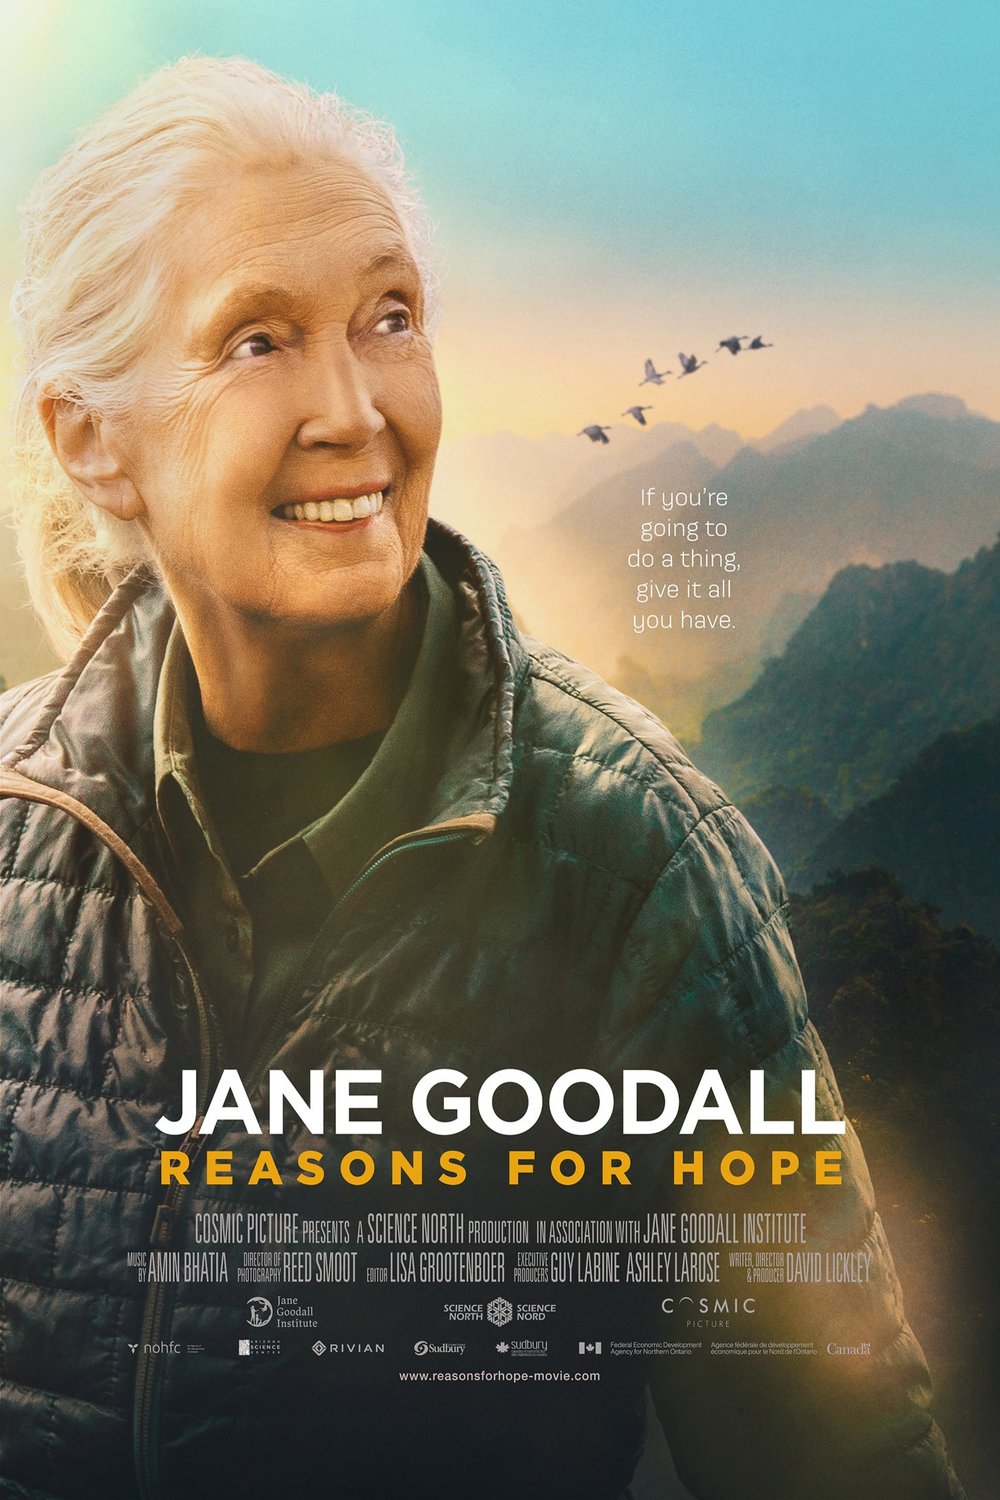 Poster of the movie Jane Goodall: Reasons for Hope